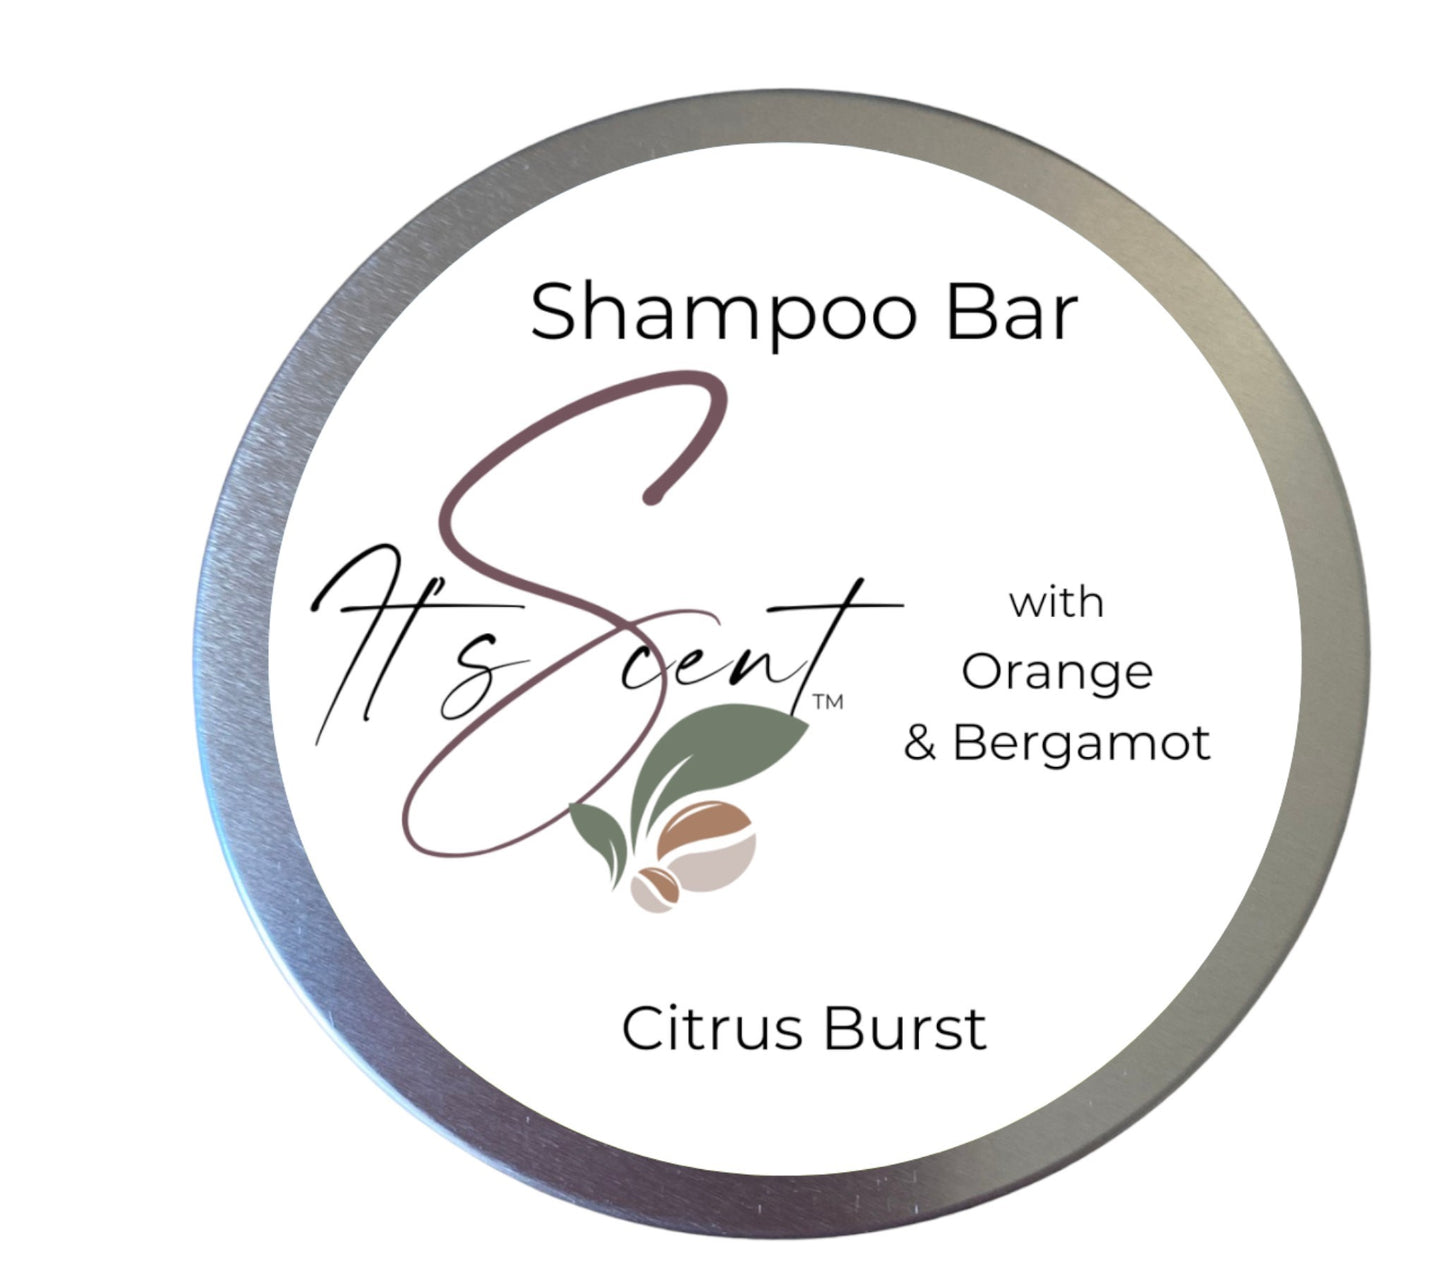 Citrus Burst Shampoo Bar. Suitable for All Hair Types incl Frizzy